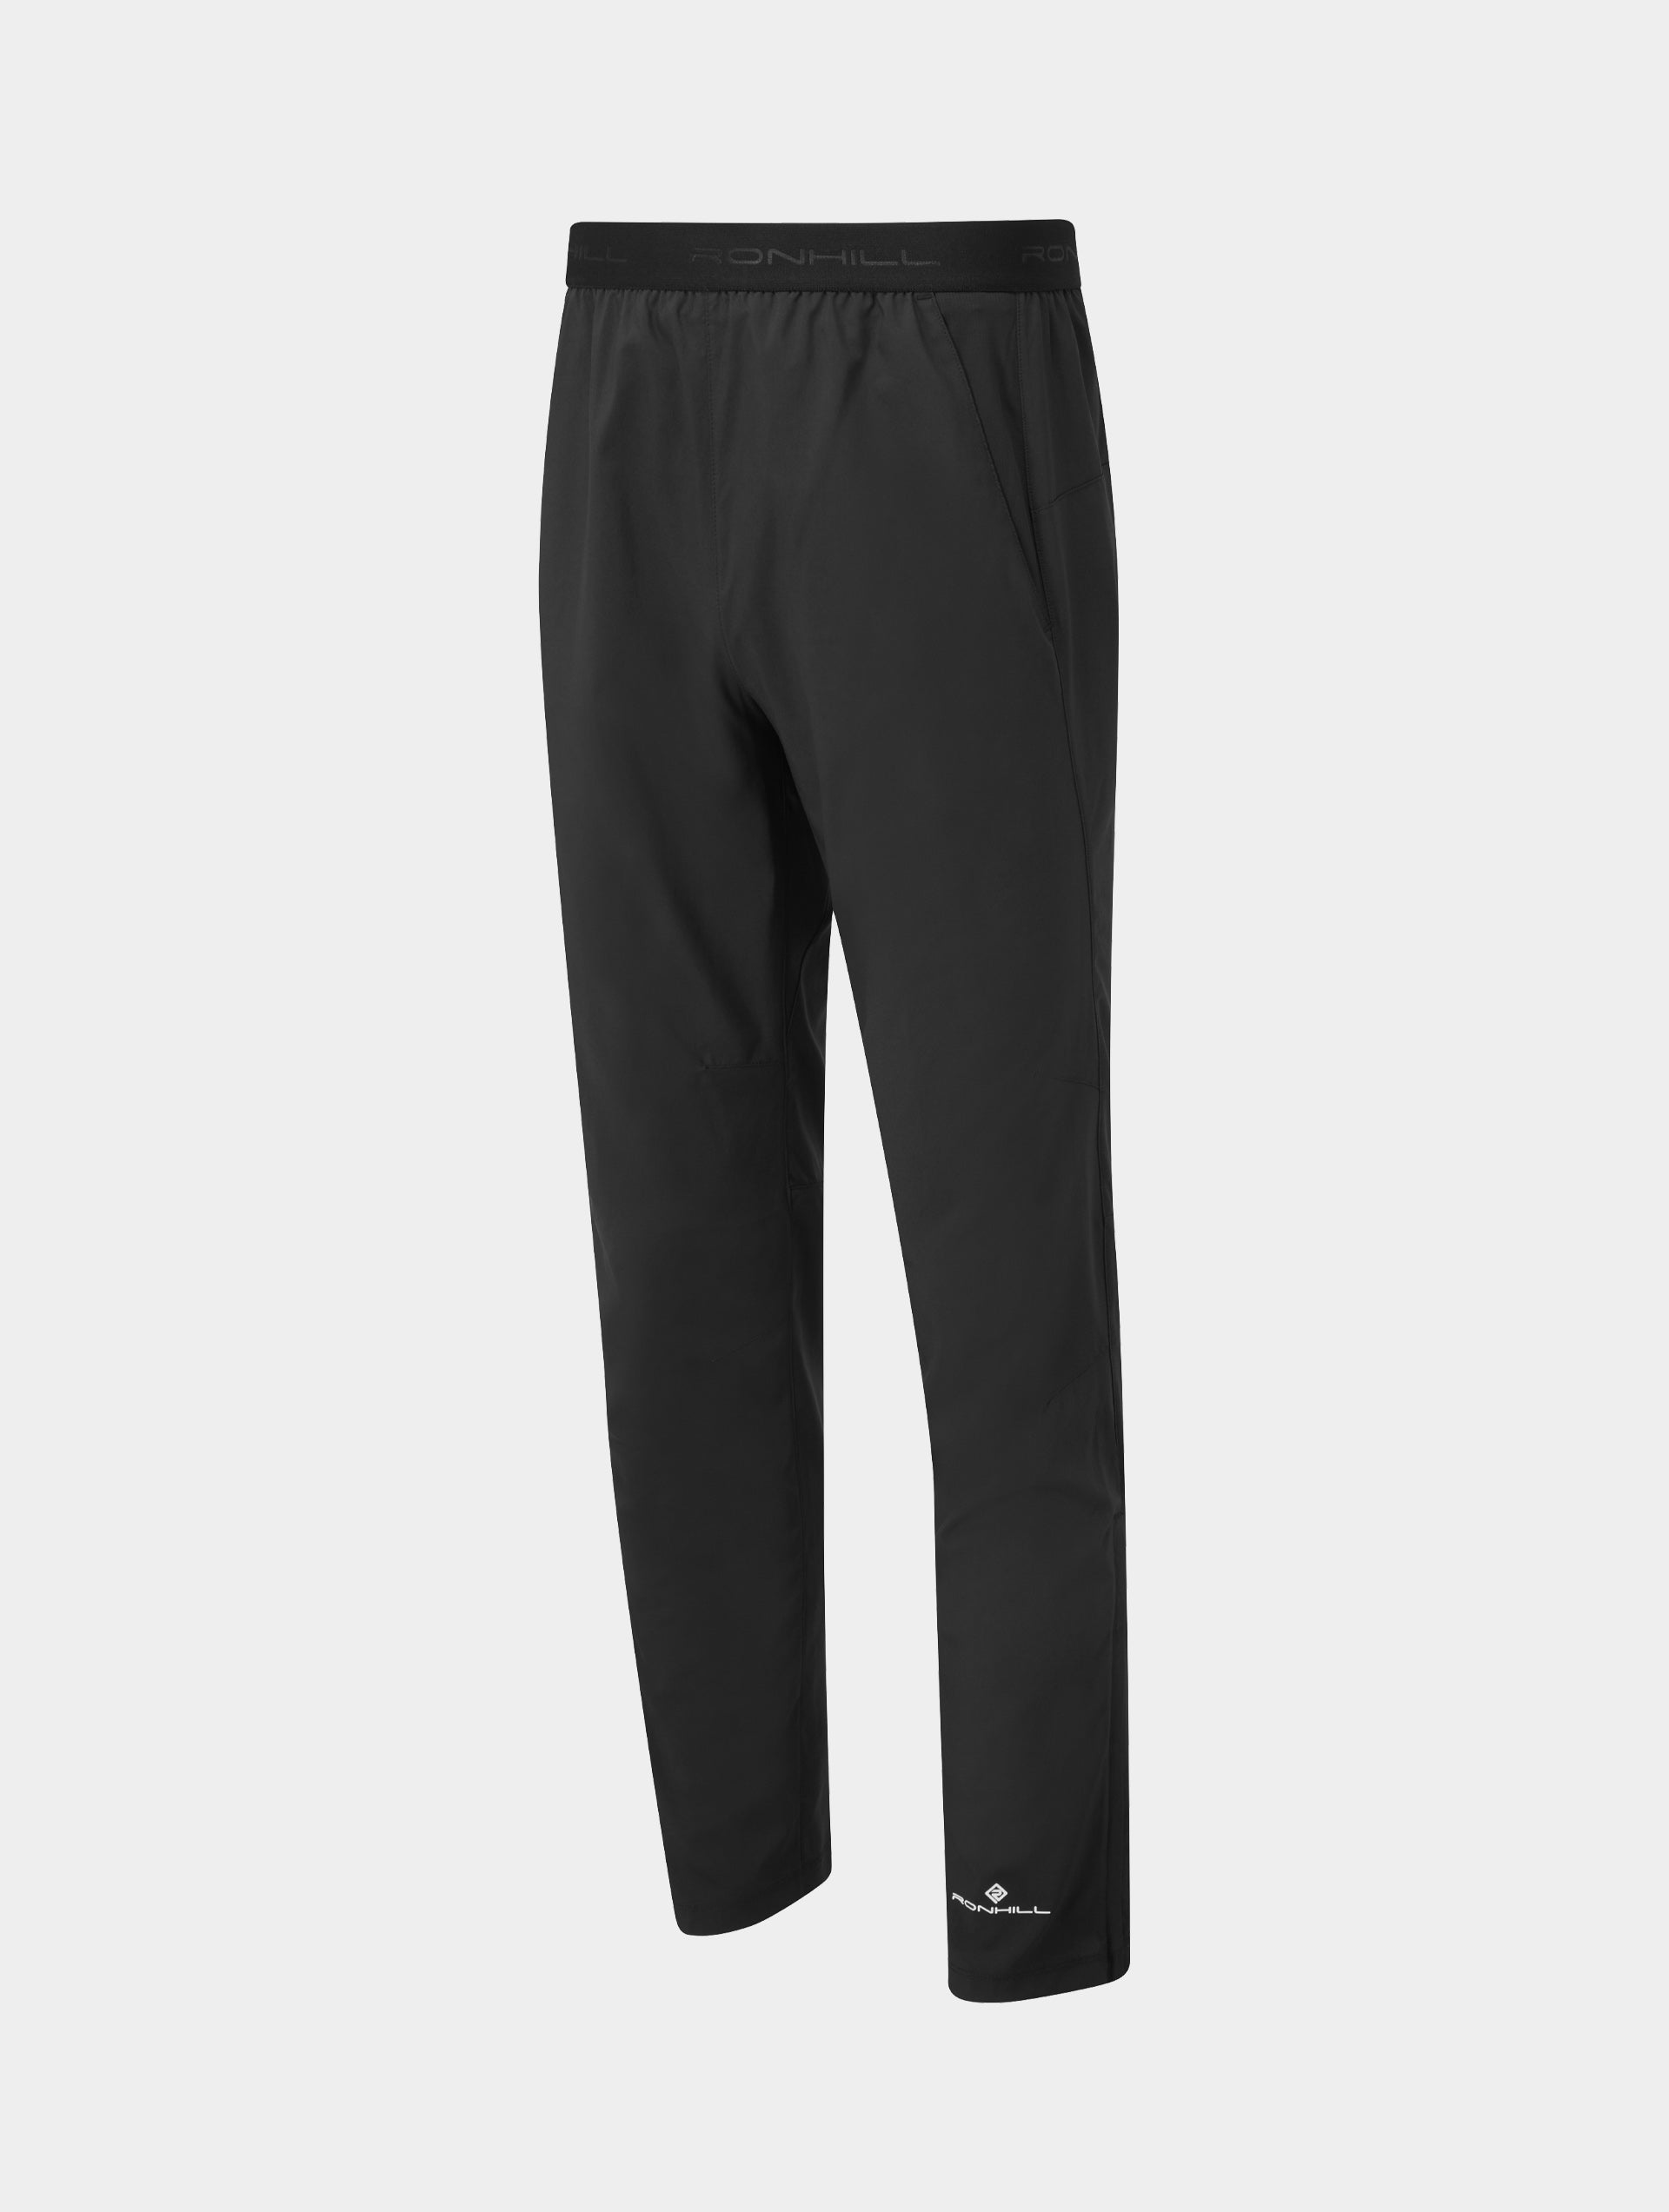 On Running Pants  Running Trousers Mens  Free UK Delivery   Alpinetrekcouk